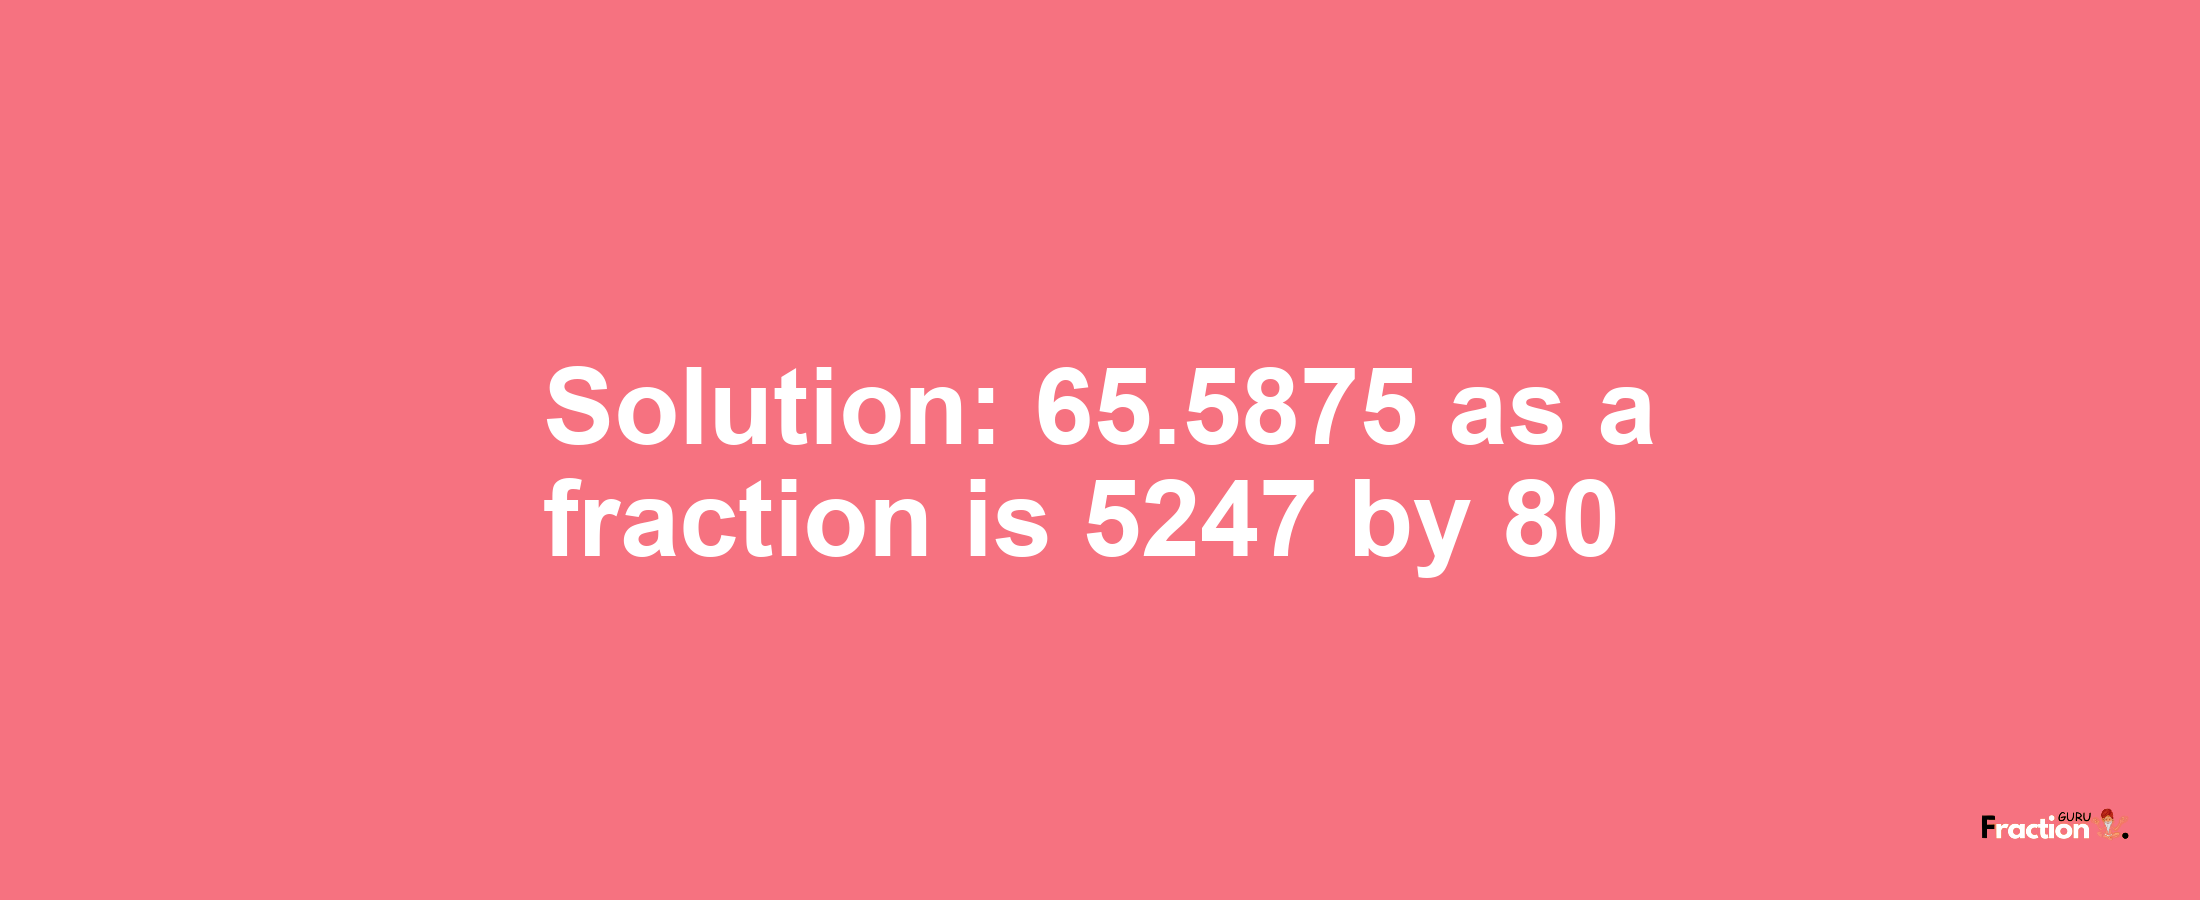 Solution:65.5875 as a fraction is 5247/80